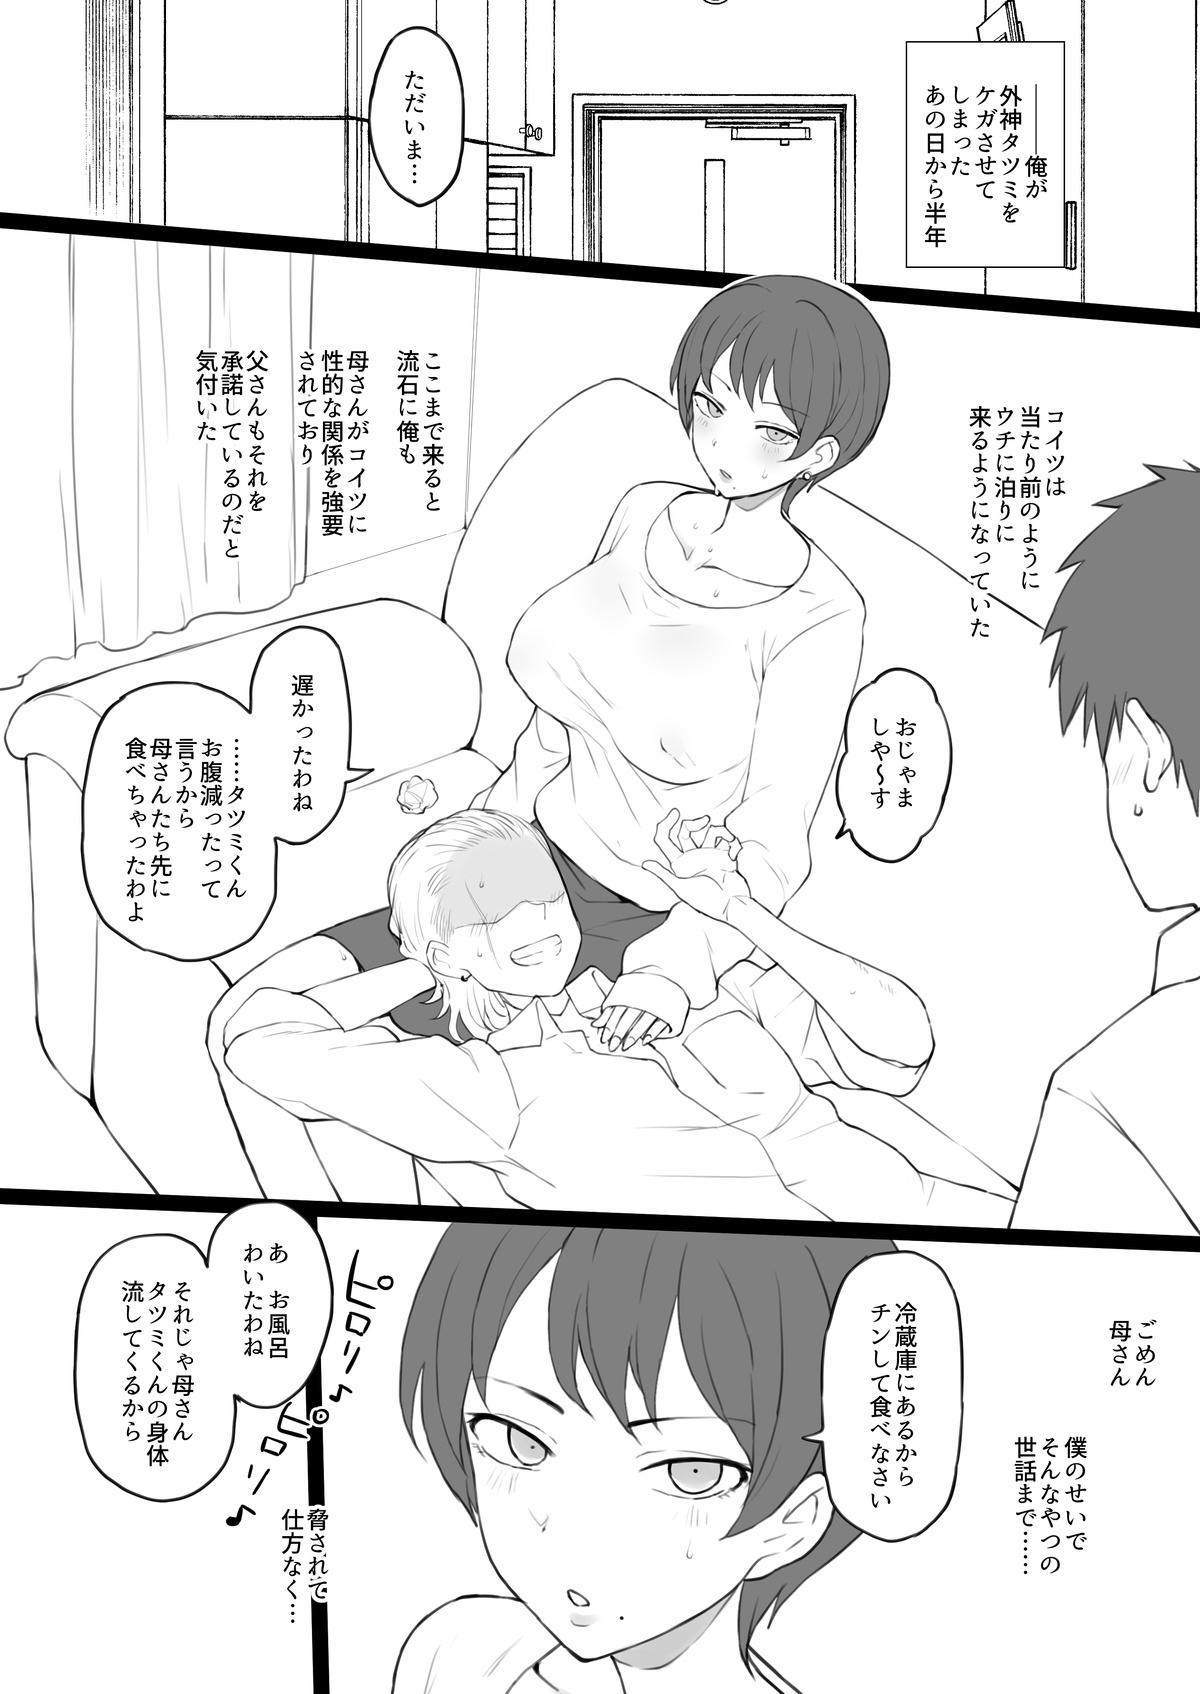 Transexual 奴隷家族 Leche - Page 10